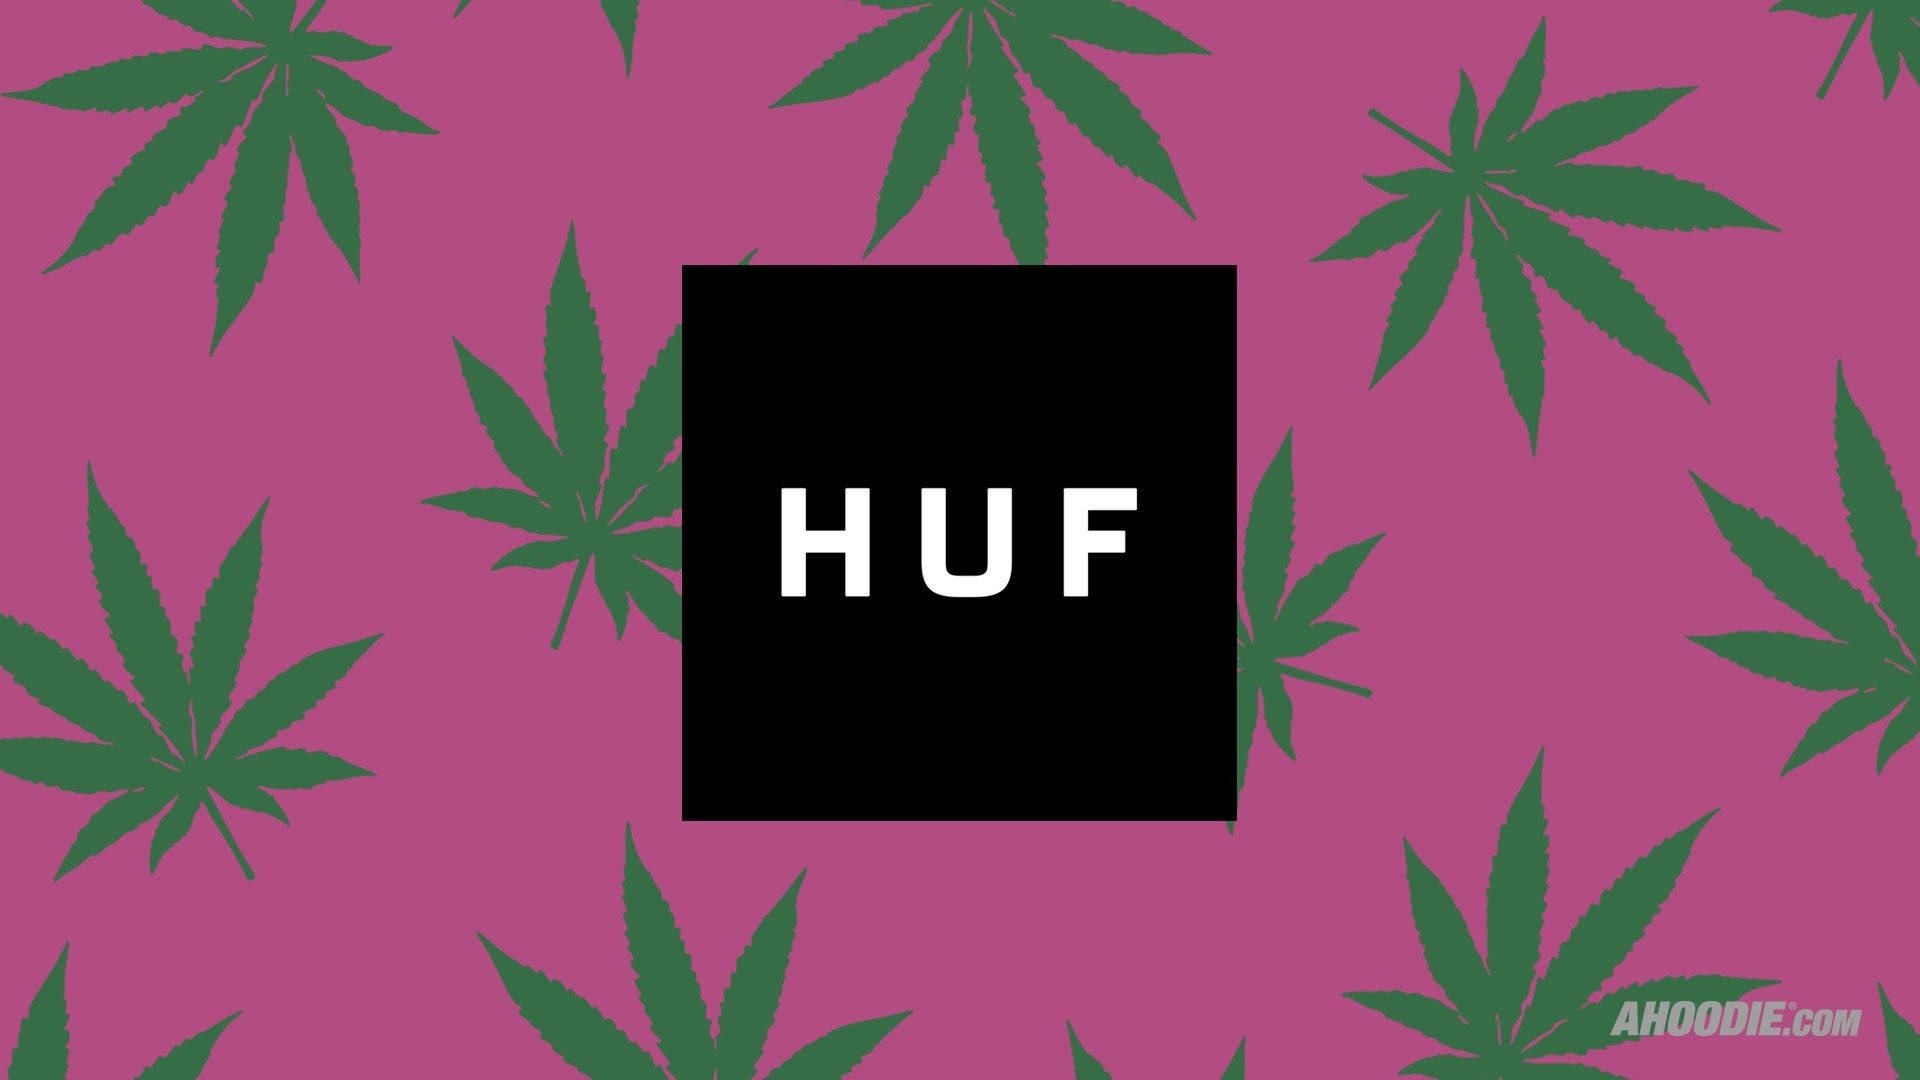 Show off your hyped up fashion style with HUF. Wallpaper